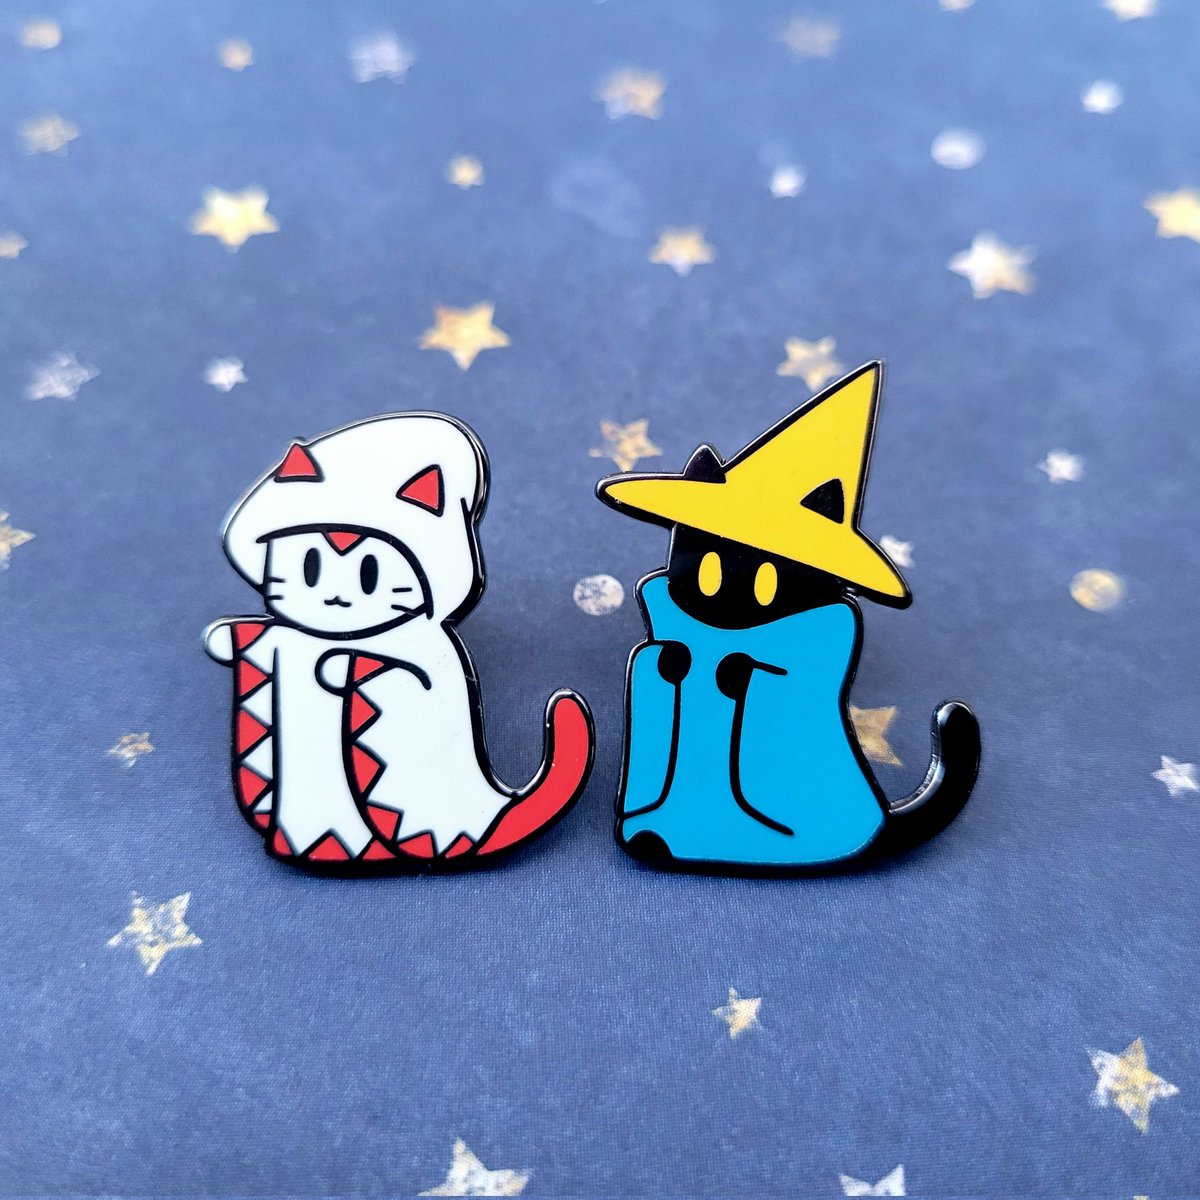 The quest continues! 🐈🐈‍⬛ Enamel pins available at thecathive.com/discount/MEOWM…